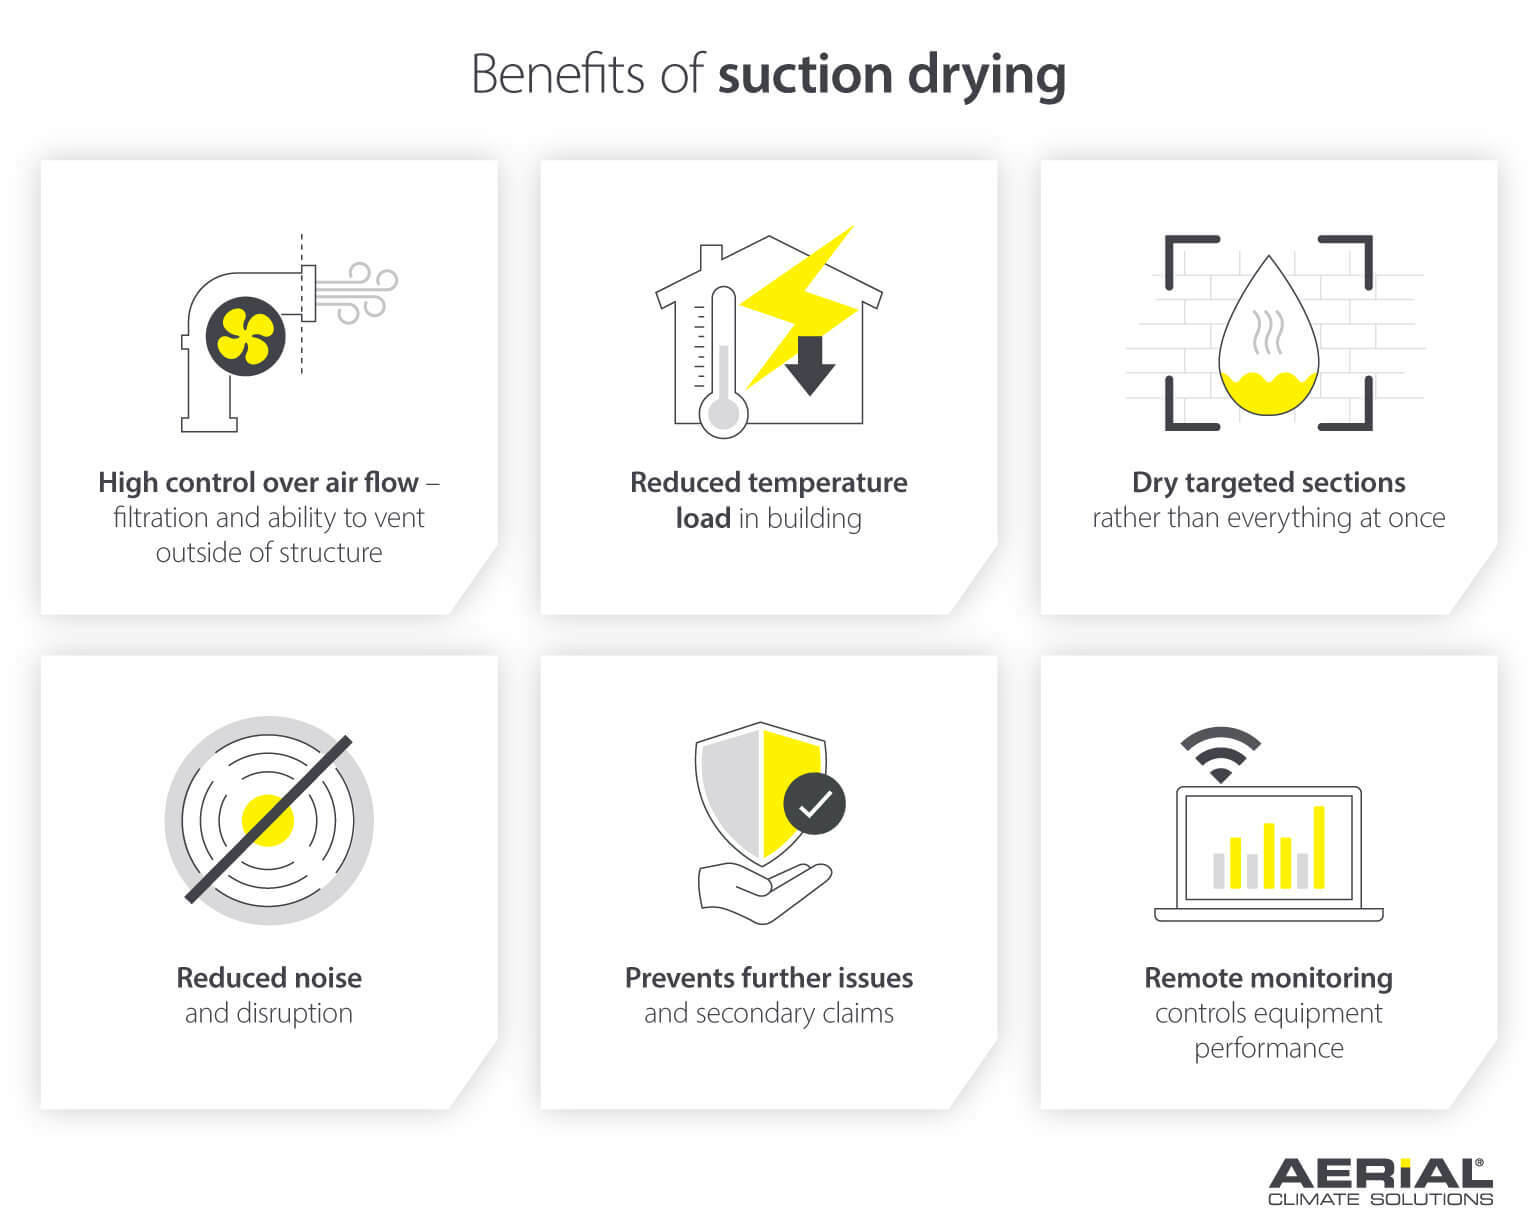 Benefits of suction or vacuum drying - negative pressure drying - Infographic image